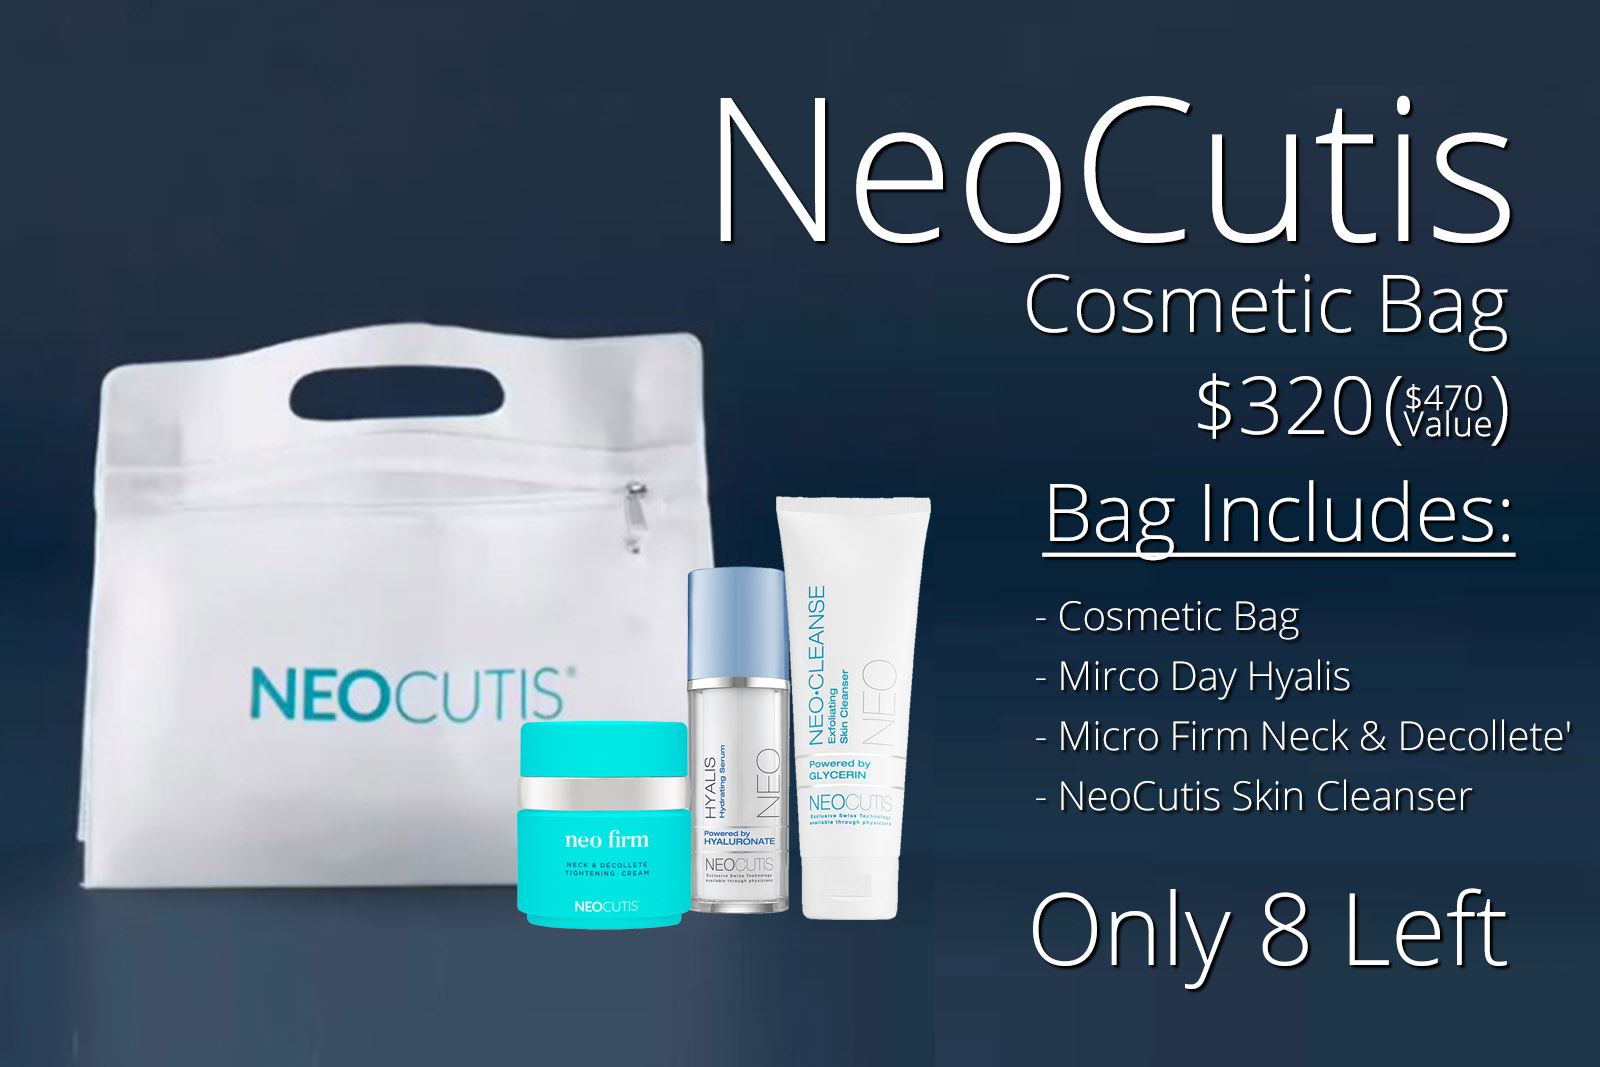 NeoCutis Cosmetic Bag and Prodcuts